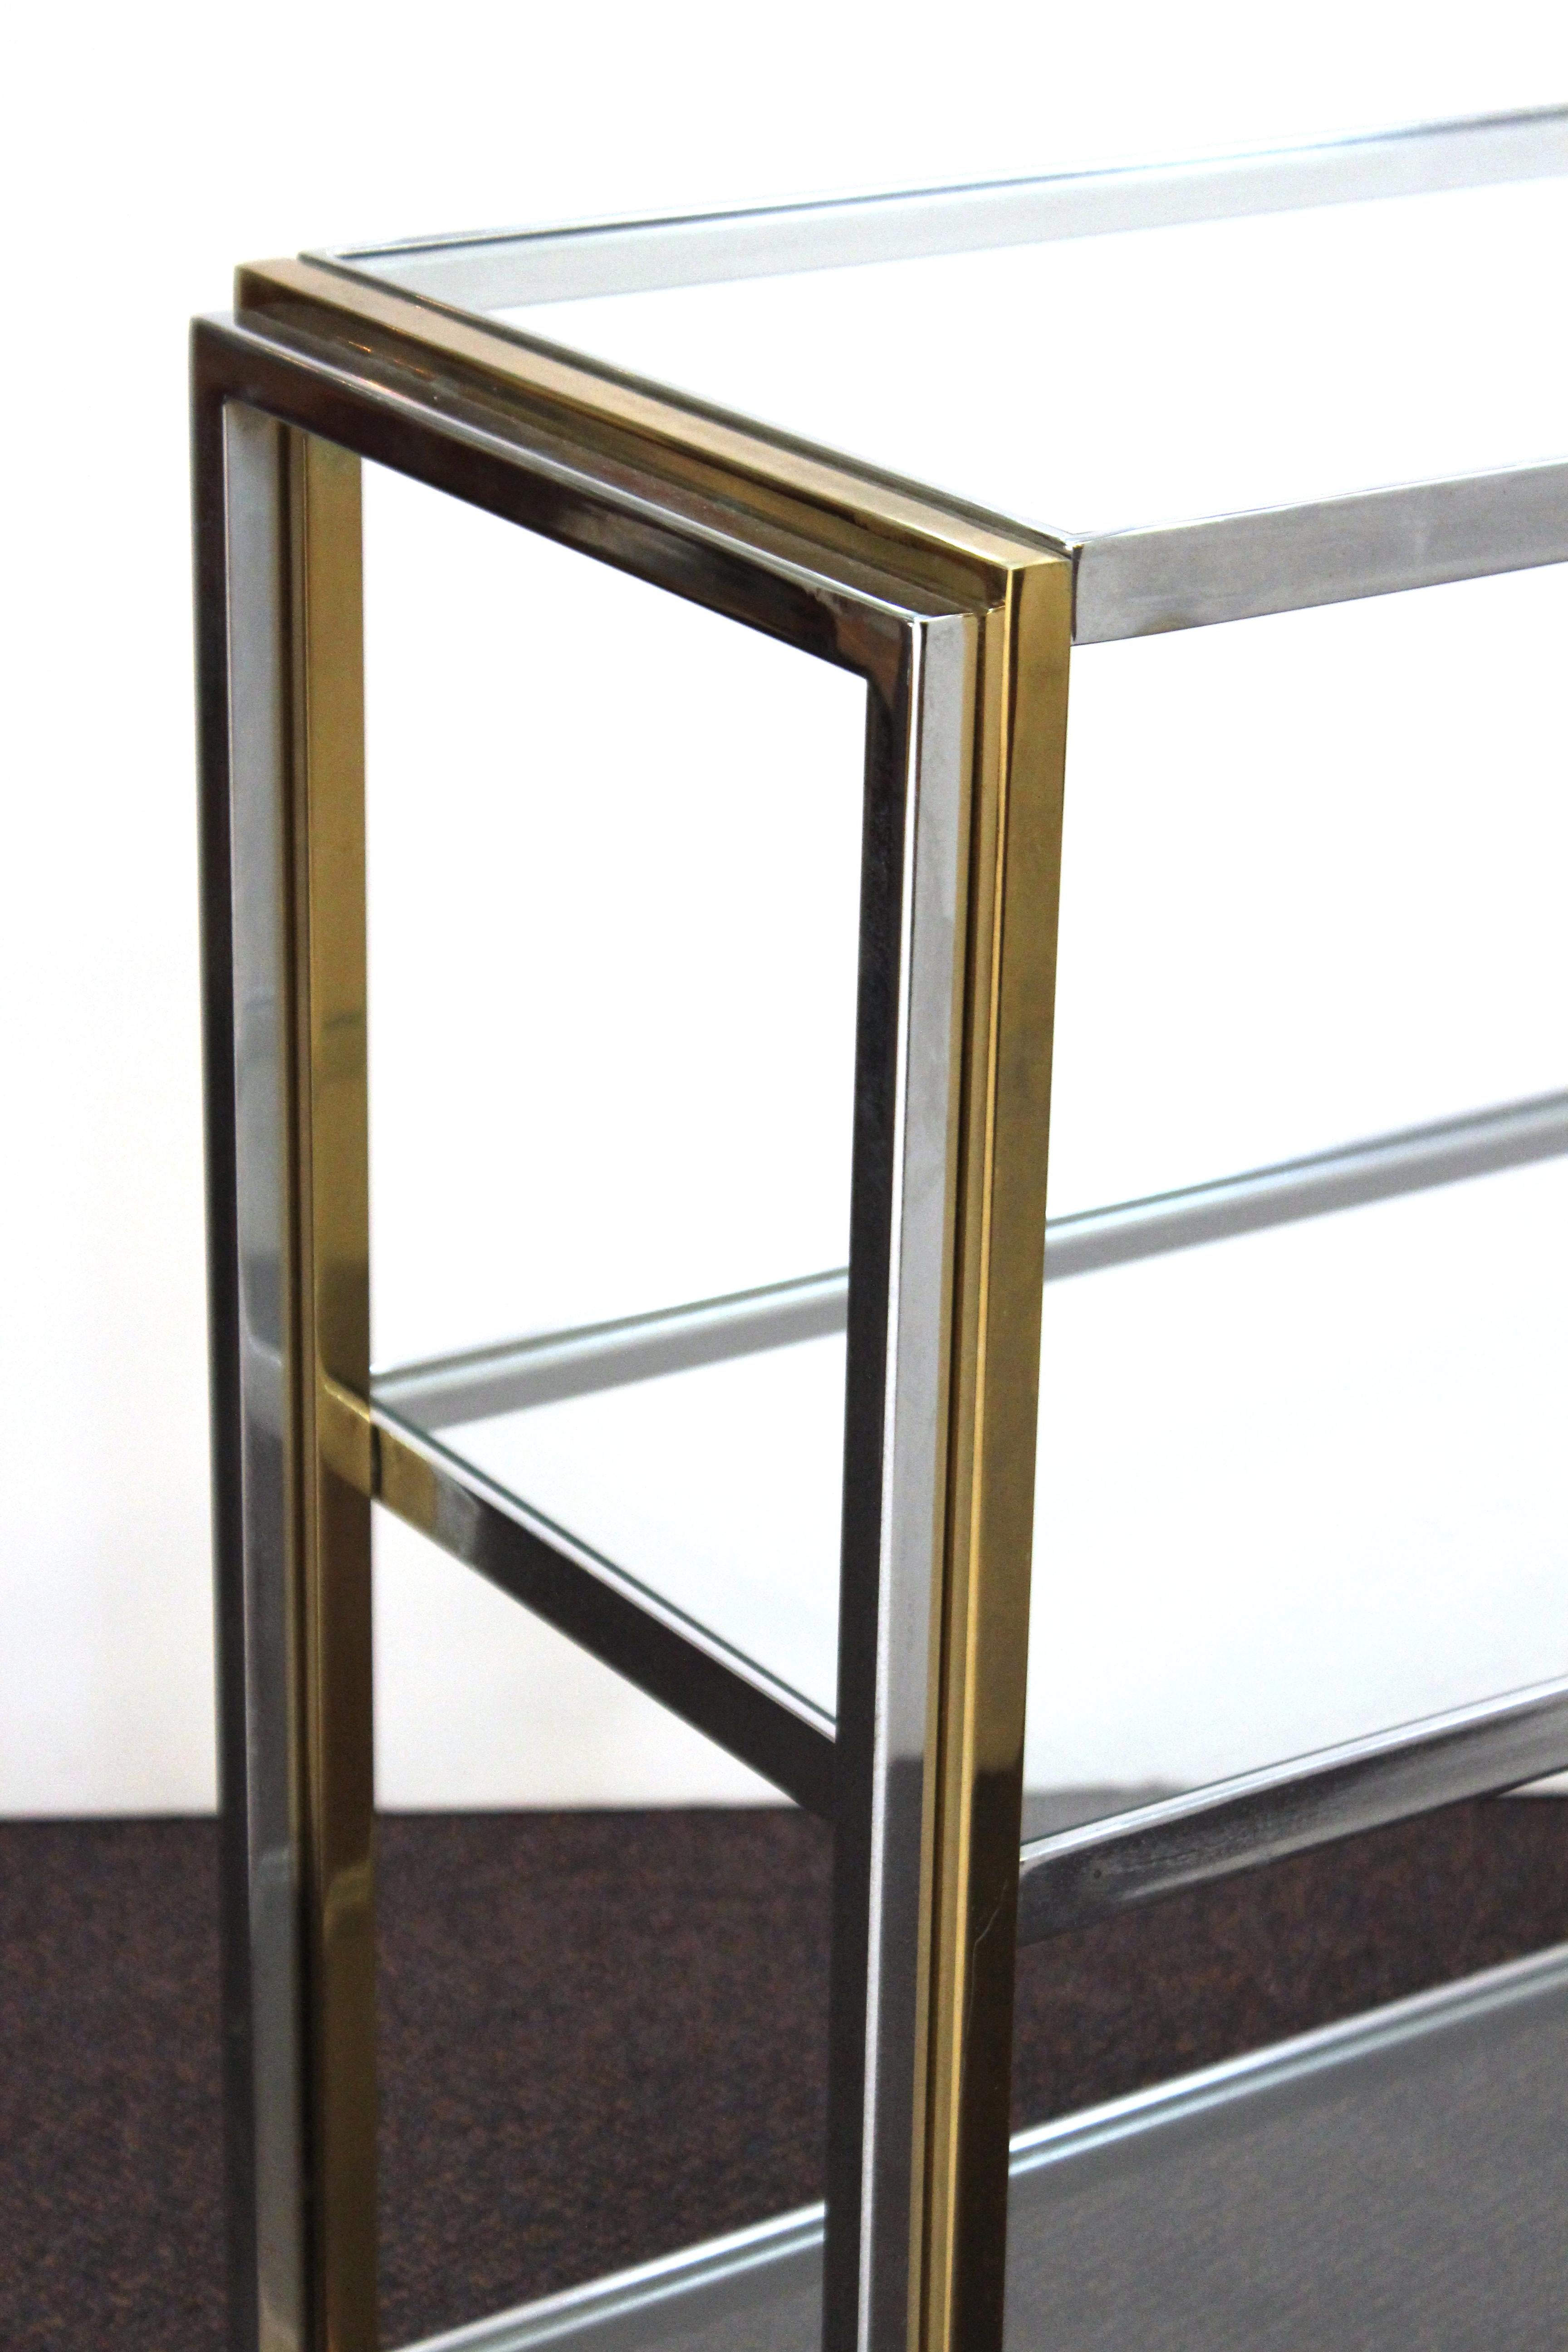 20th Century Modern Chrome Sideboard with Glass Shelves